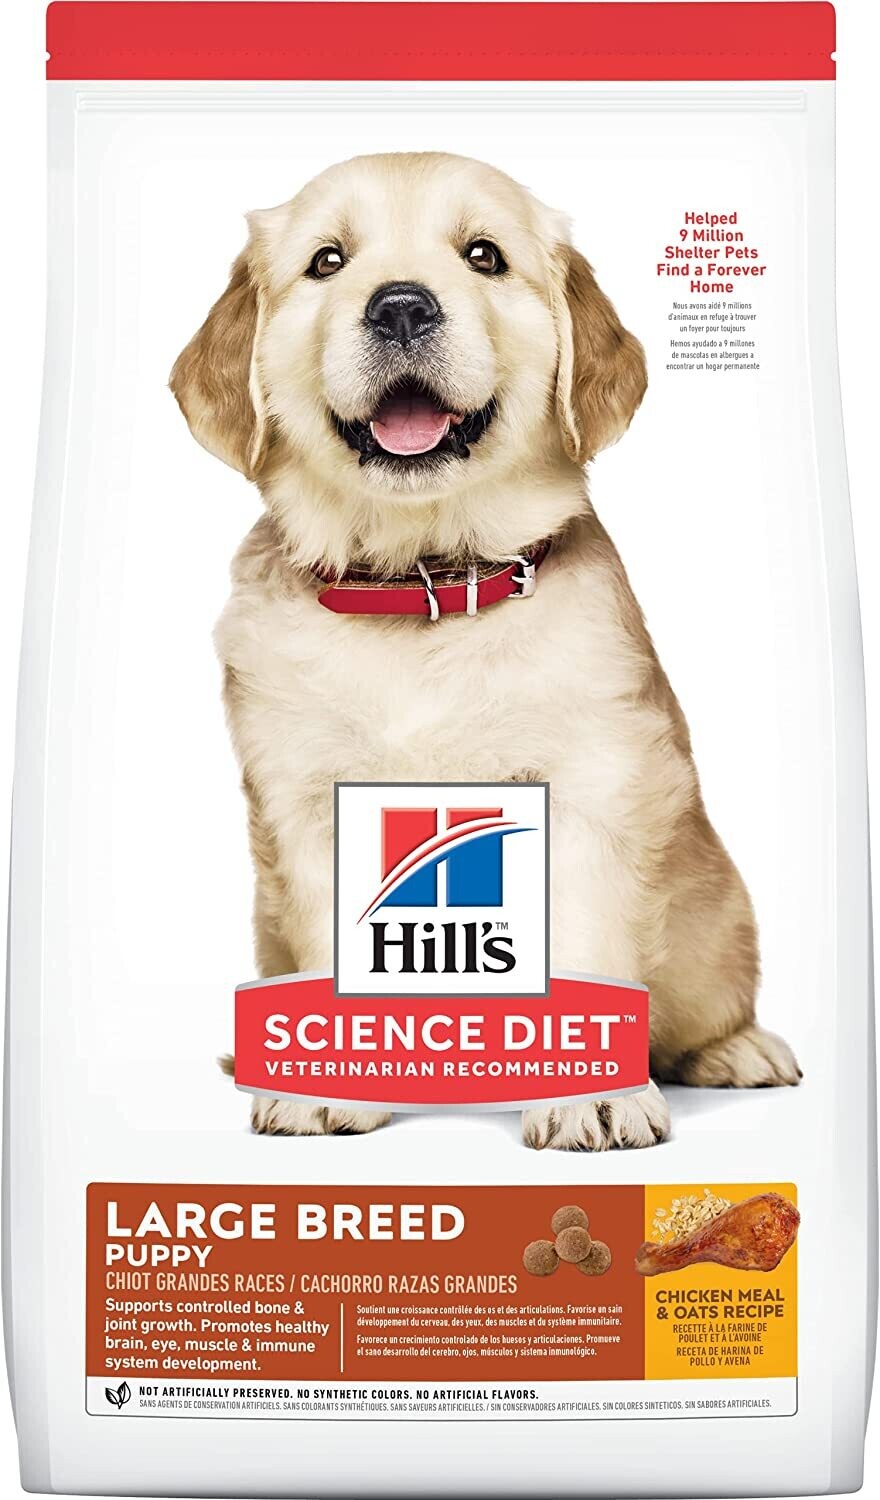 HILL'S SCIENCE DIET LARGE BREED PUPPY 15.5LB